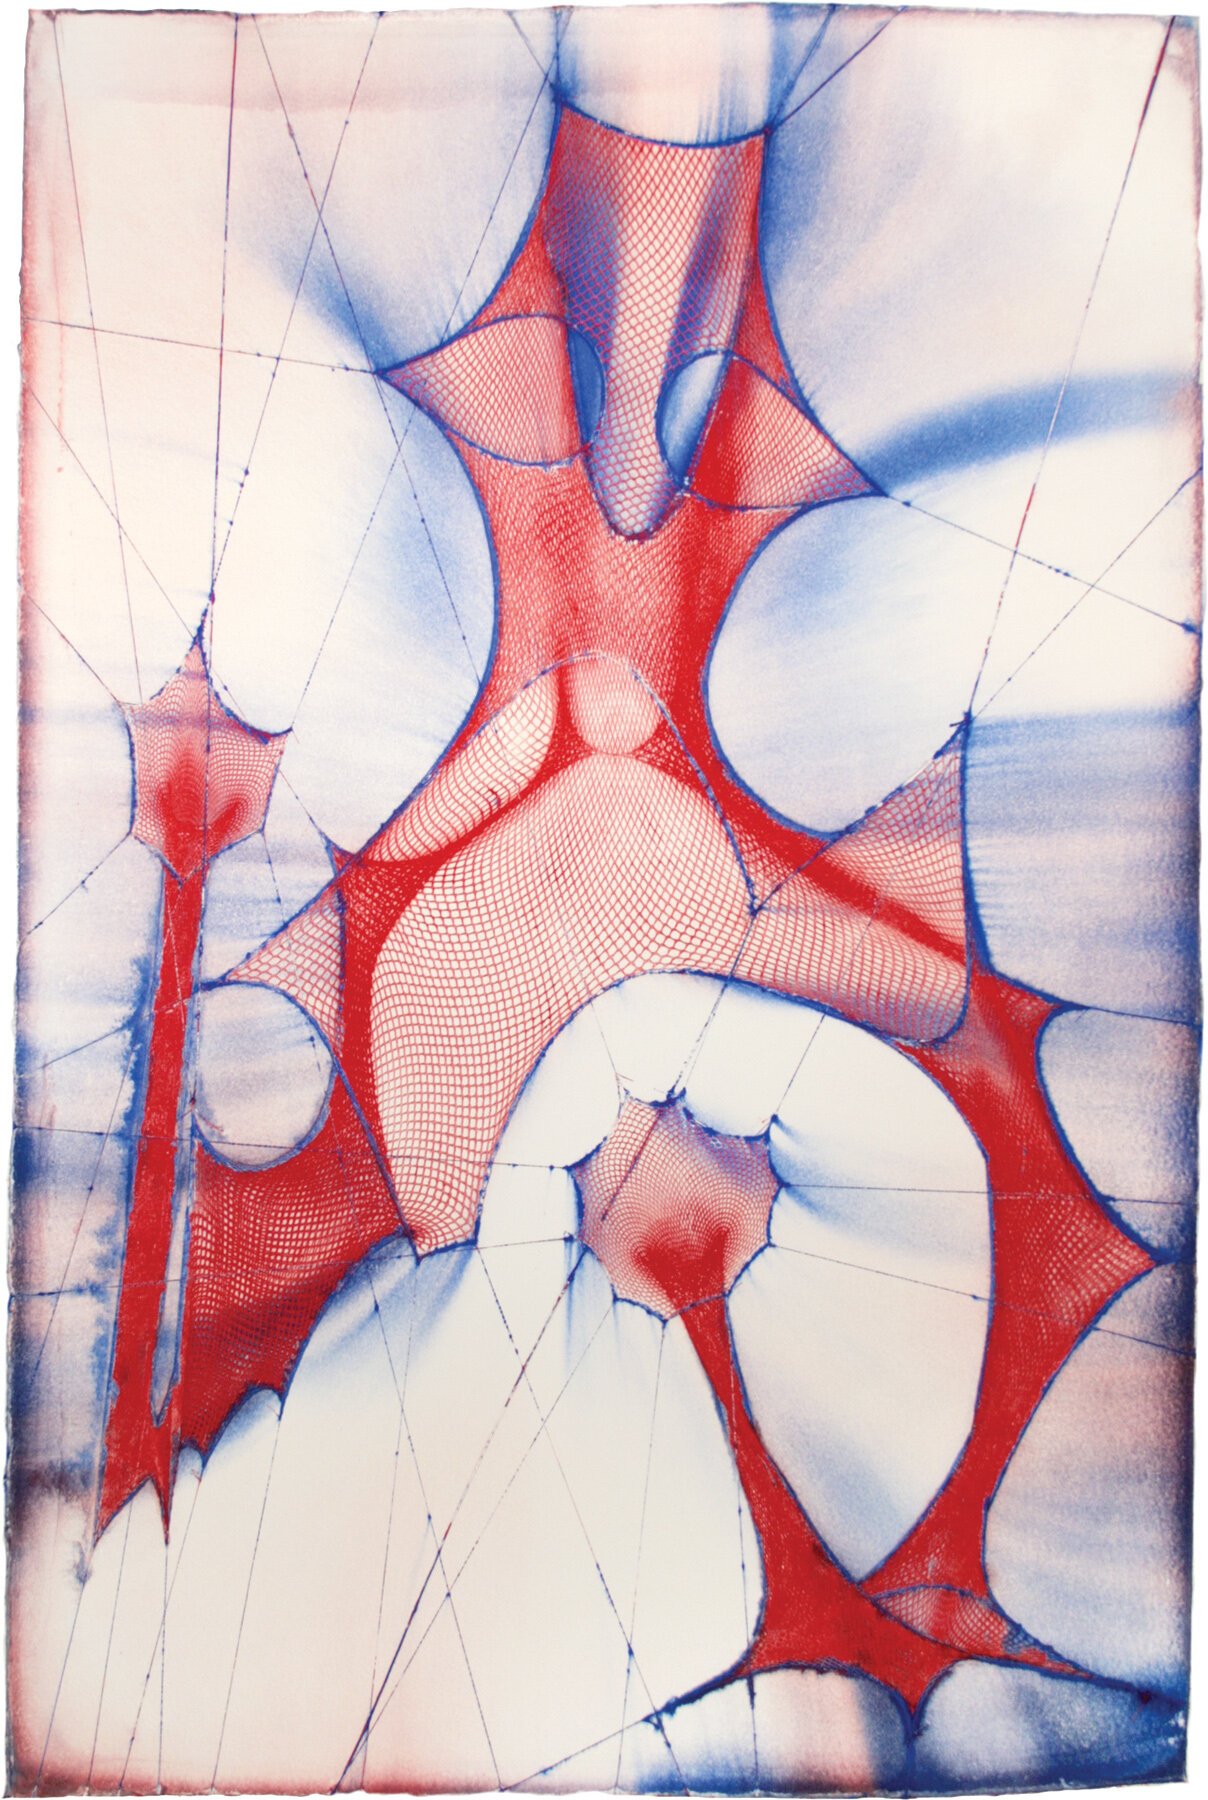  E.V. Day,  Shazam (Red and Blue) , 2009, Fishnet bodysuit pigment embossing, on cotton base sheet, 59.5 x 39.25 inches 